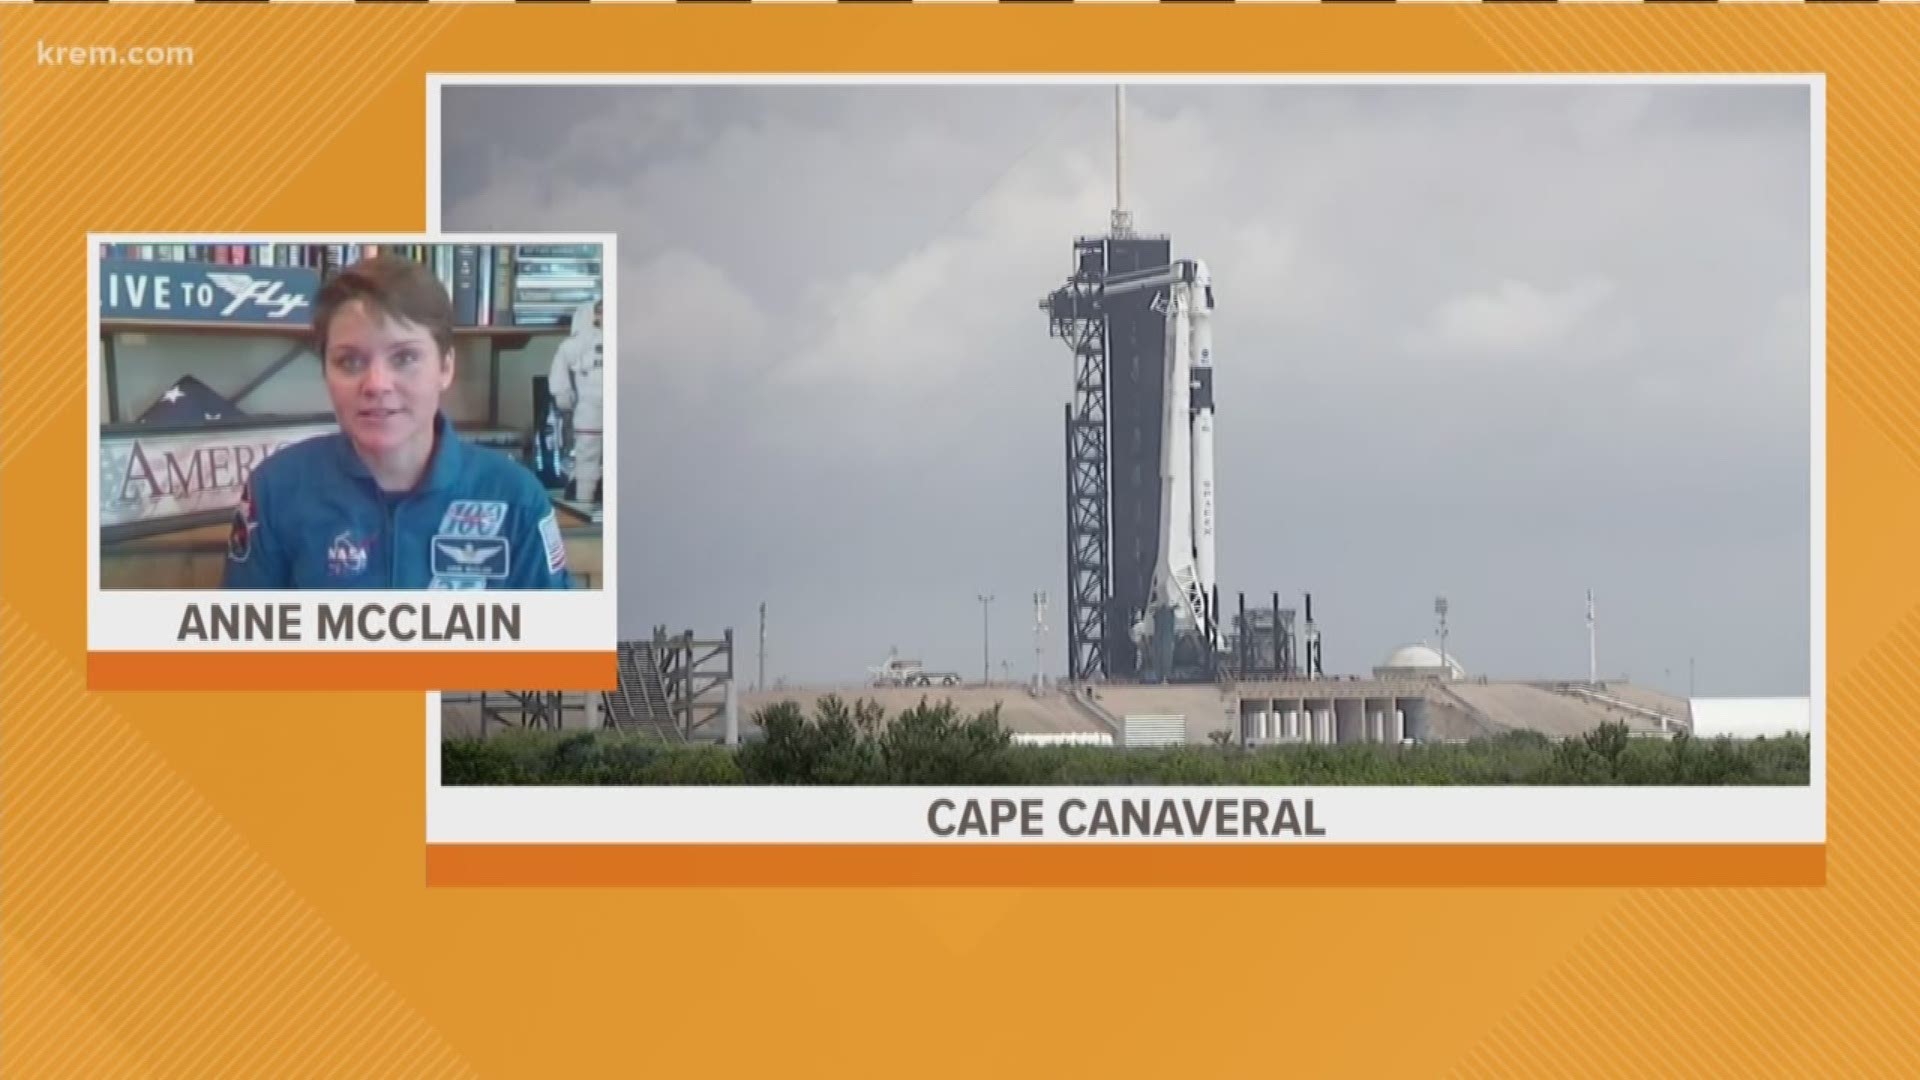 Spokane native and NASA astronaut Anne McClain joined Up with KREM to give viewers an insider's perspective on Wednesday's historic SpaceX launch.